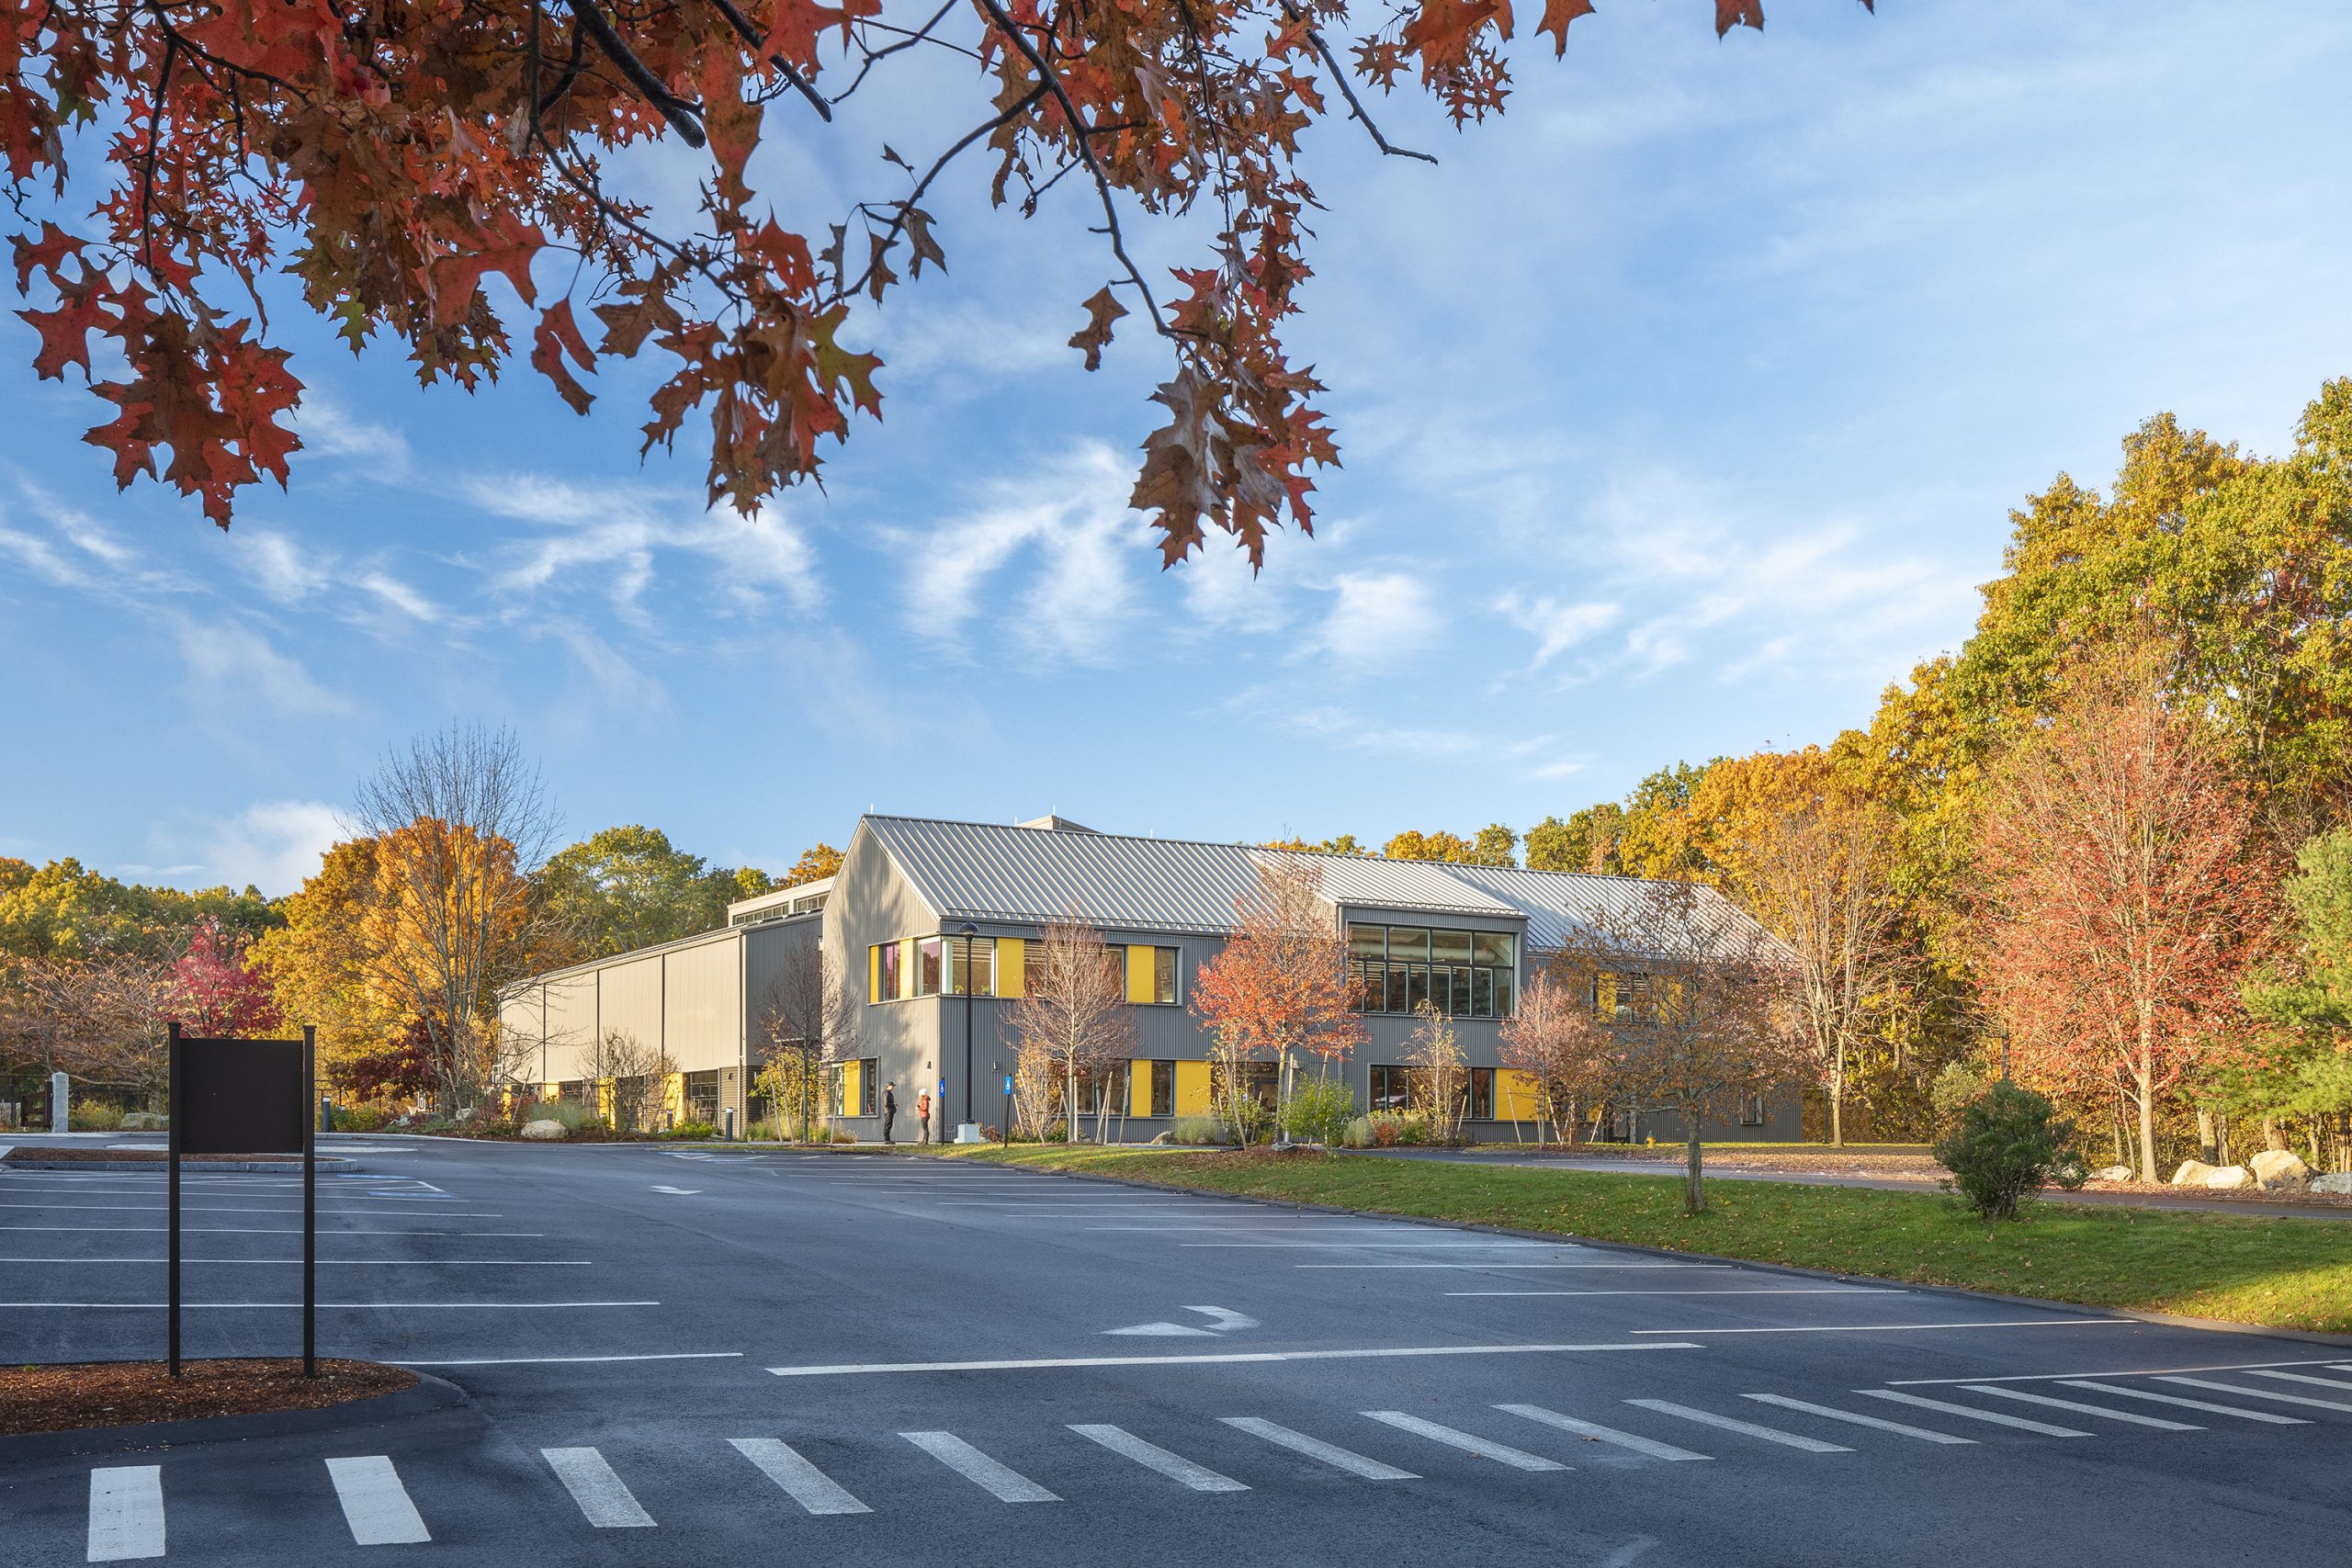 Belmont Day School Barn wins 2021 AIA Education Facility Design Award of Excellence!